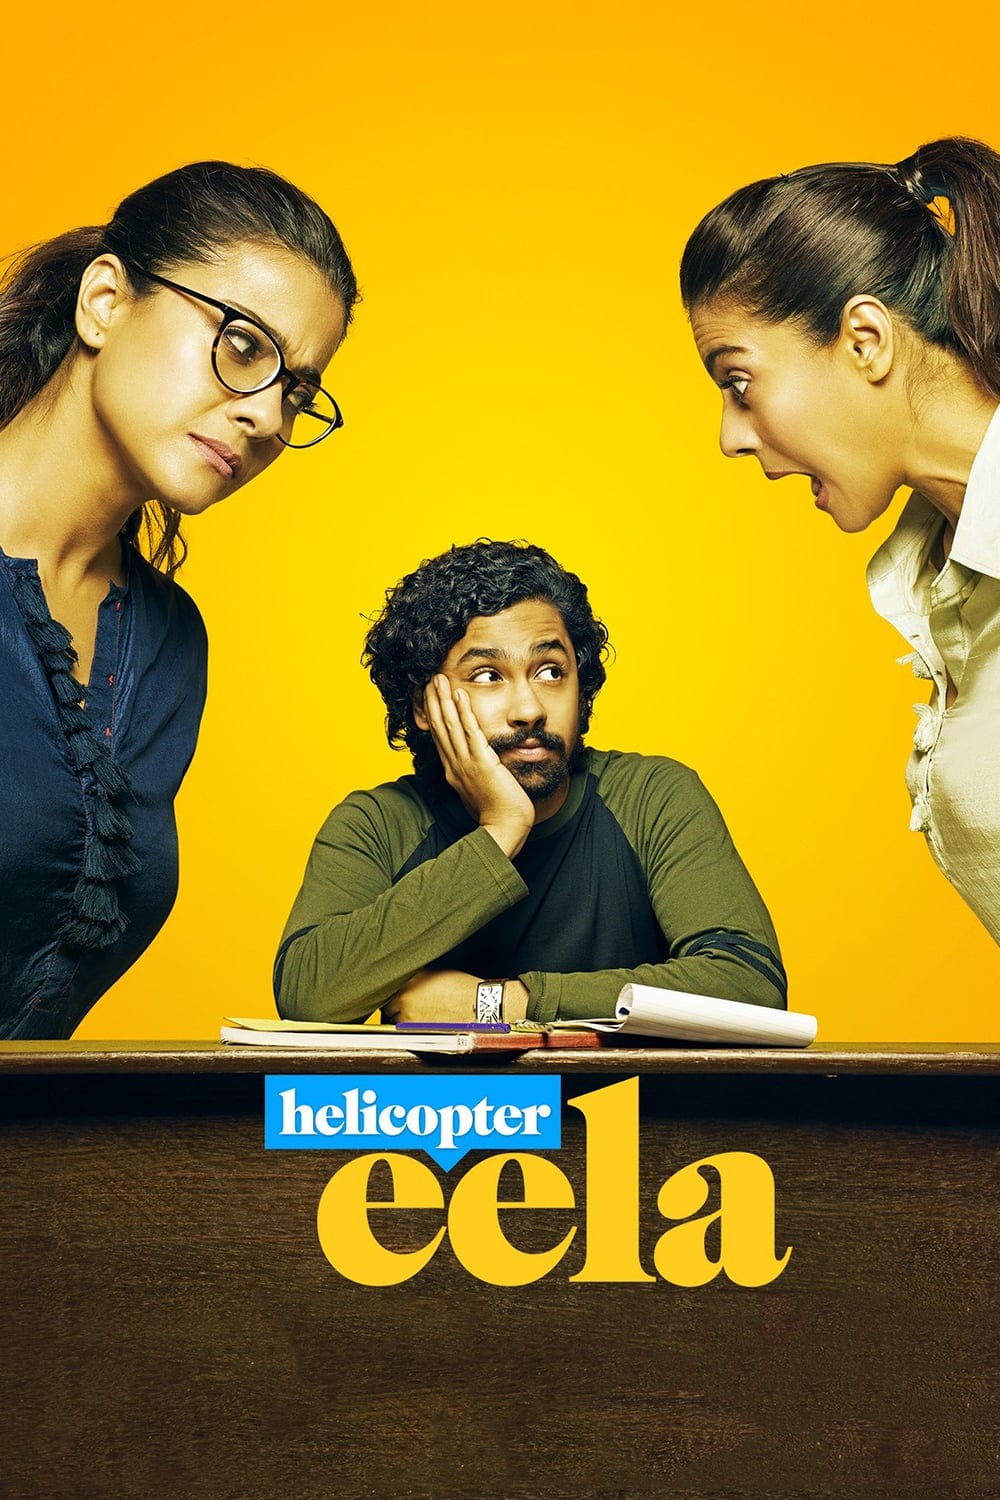 Poster for the movie "Helicopter Eela"